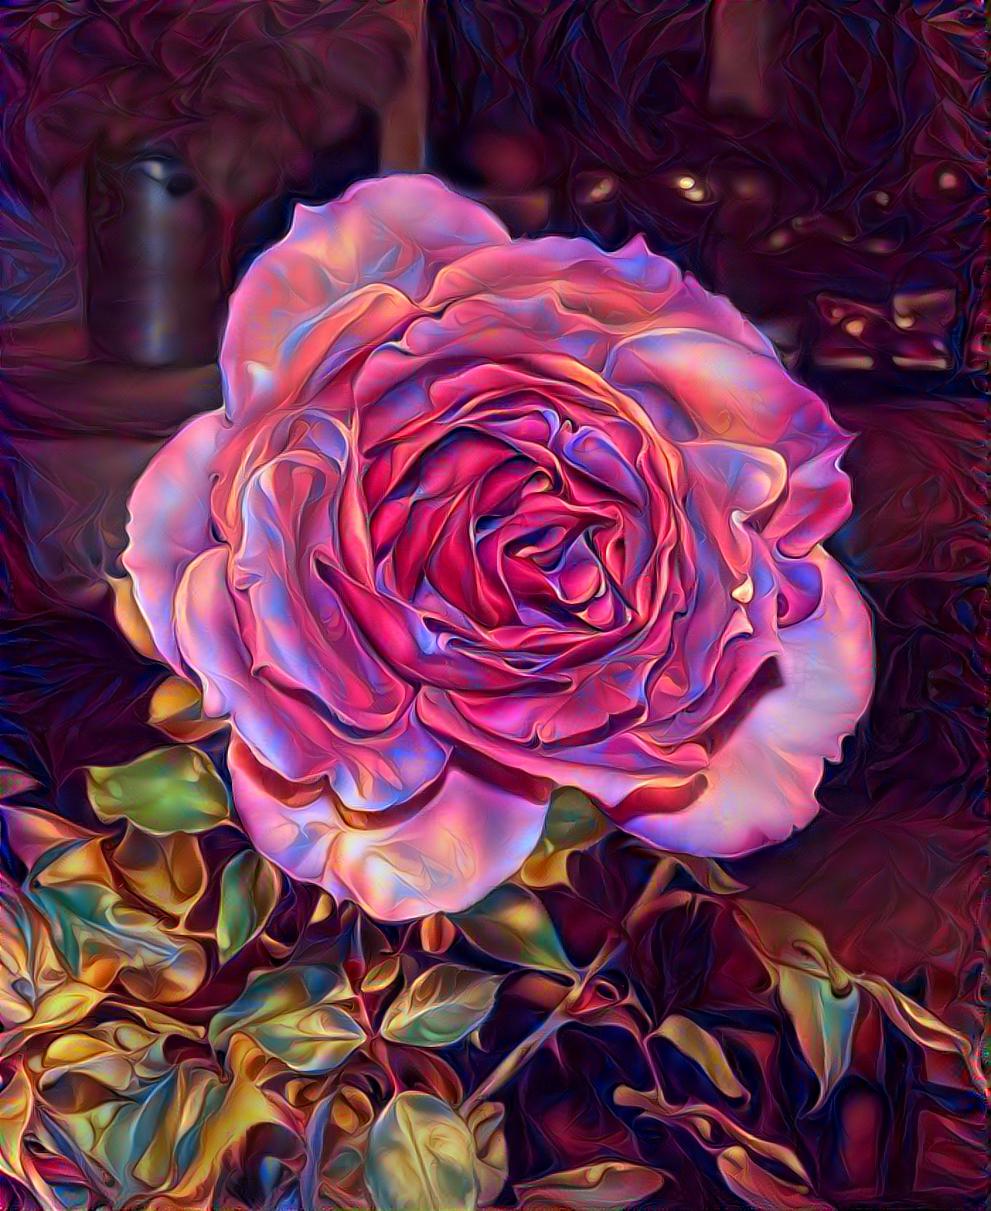 Our Rose